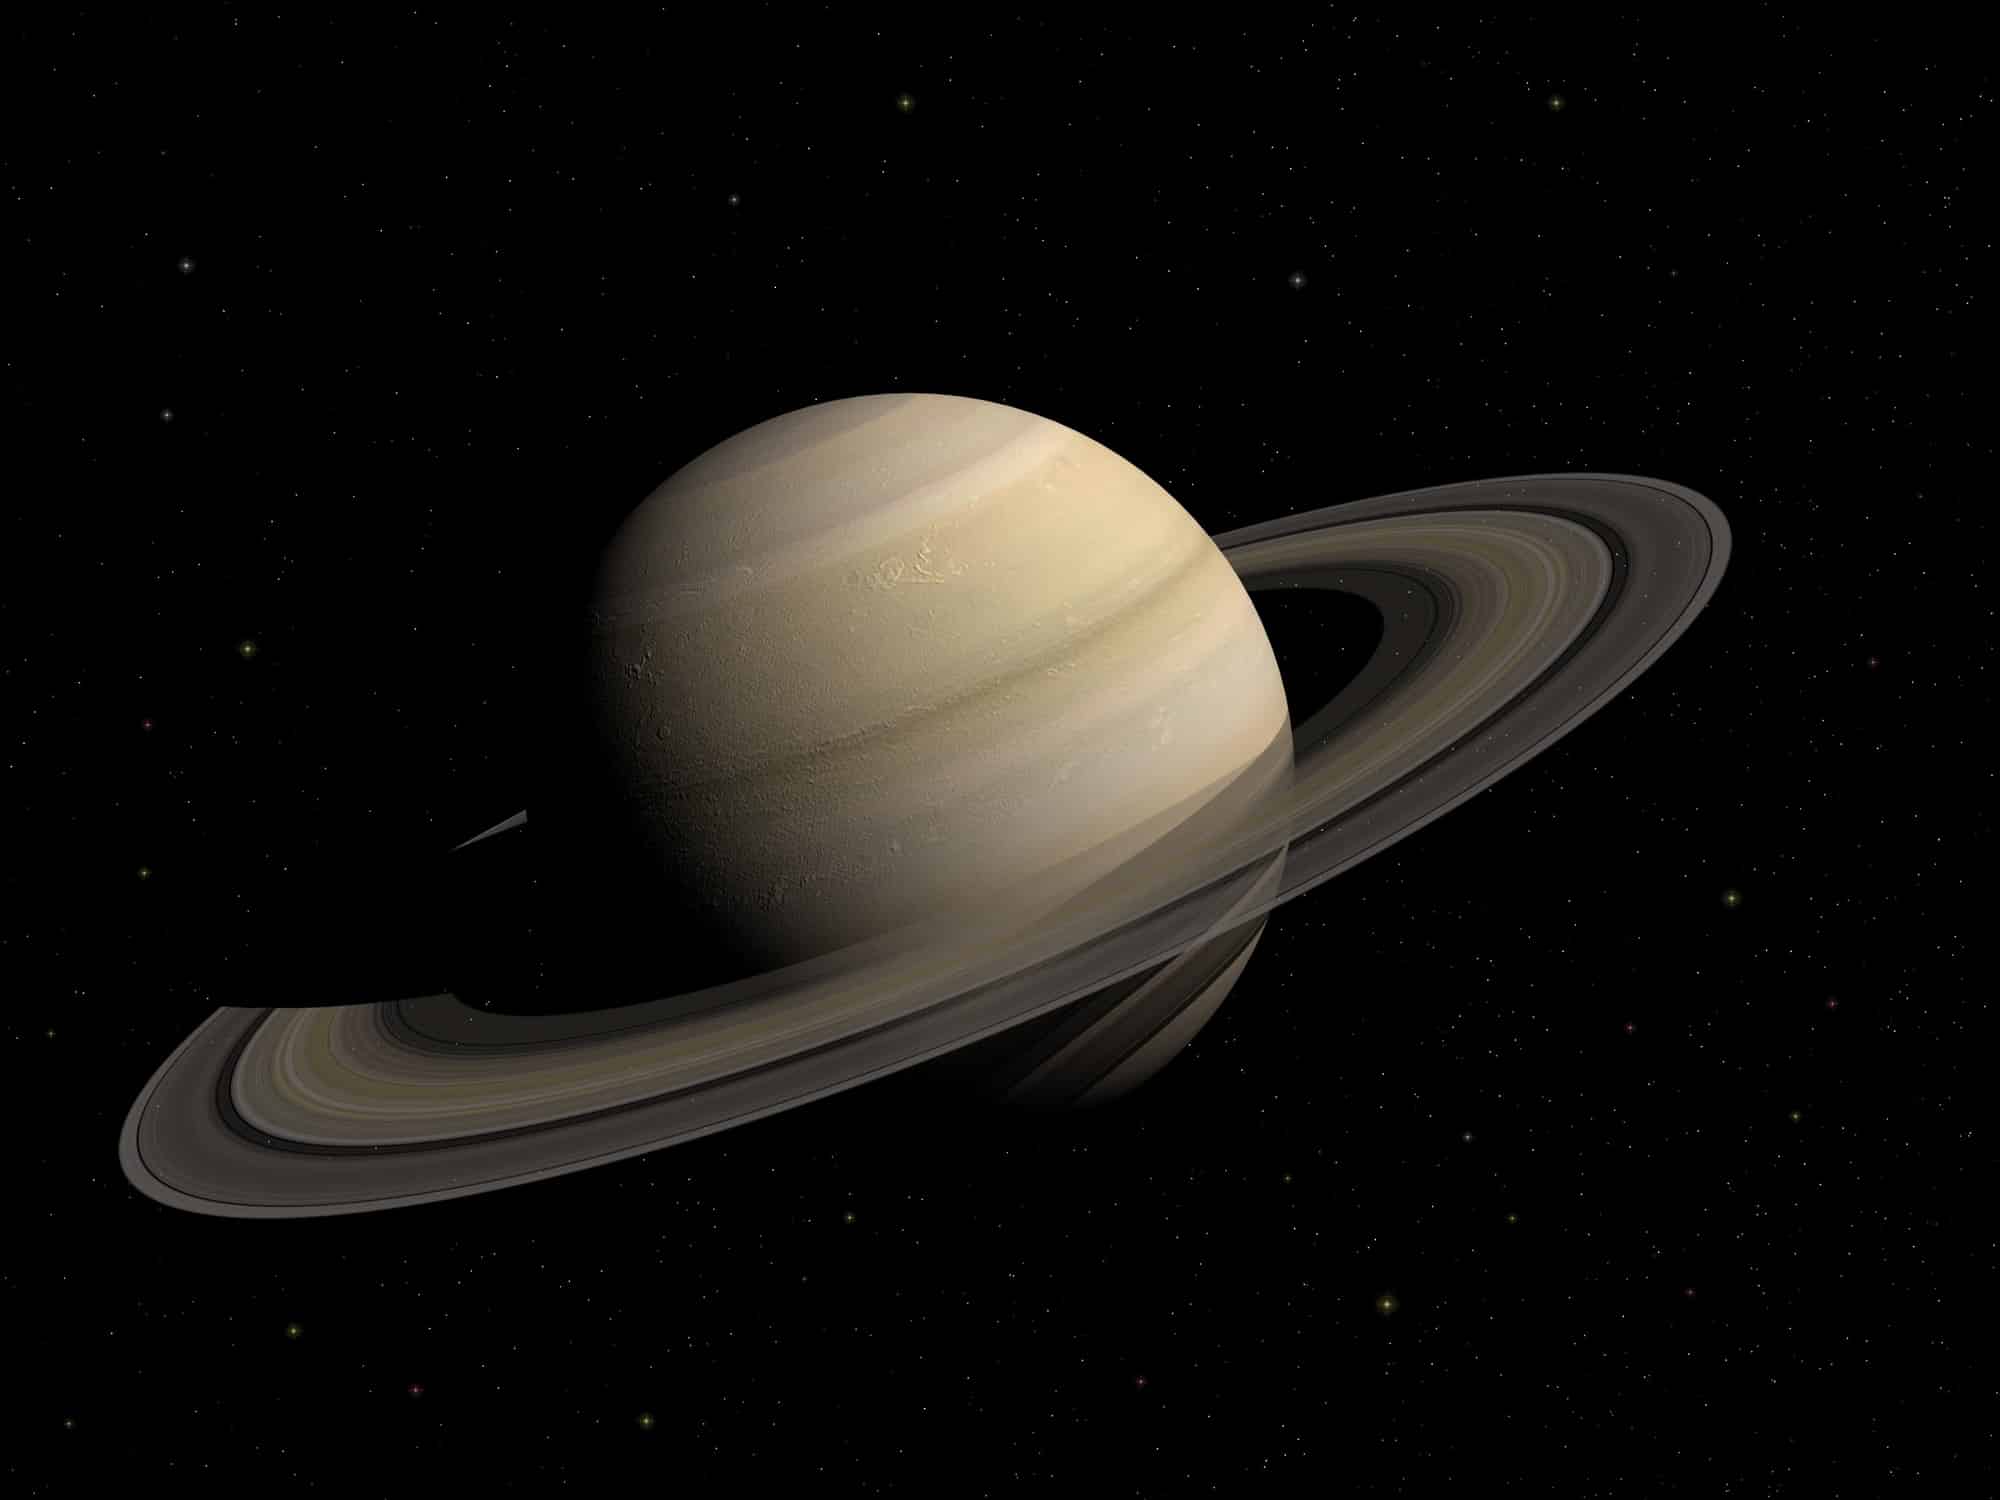 Facts about the planets of our solar system - Saturn